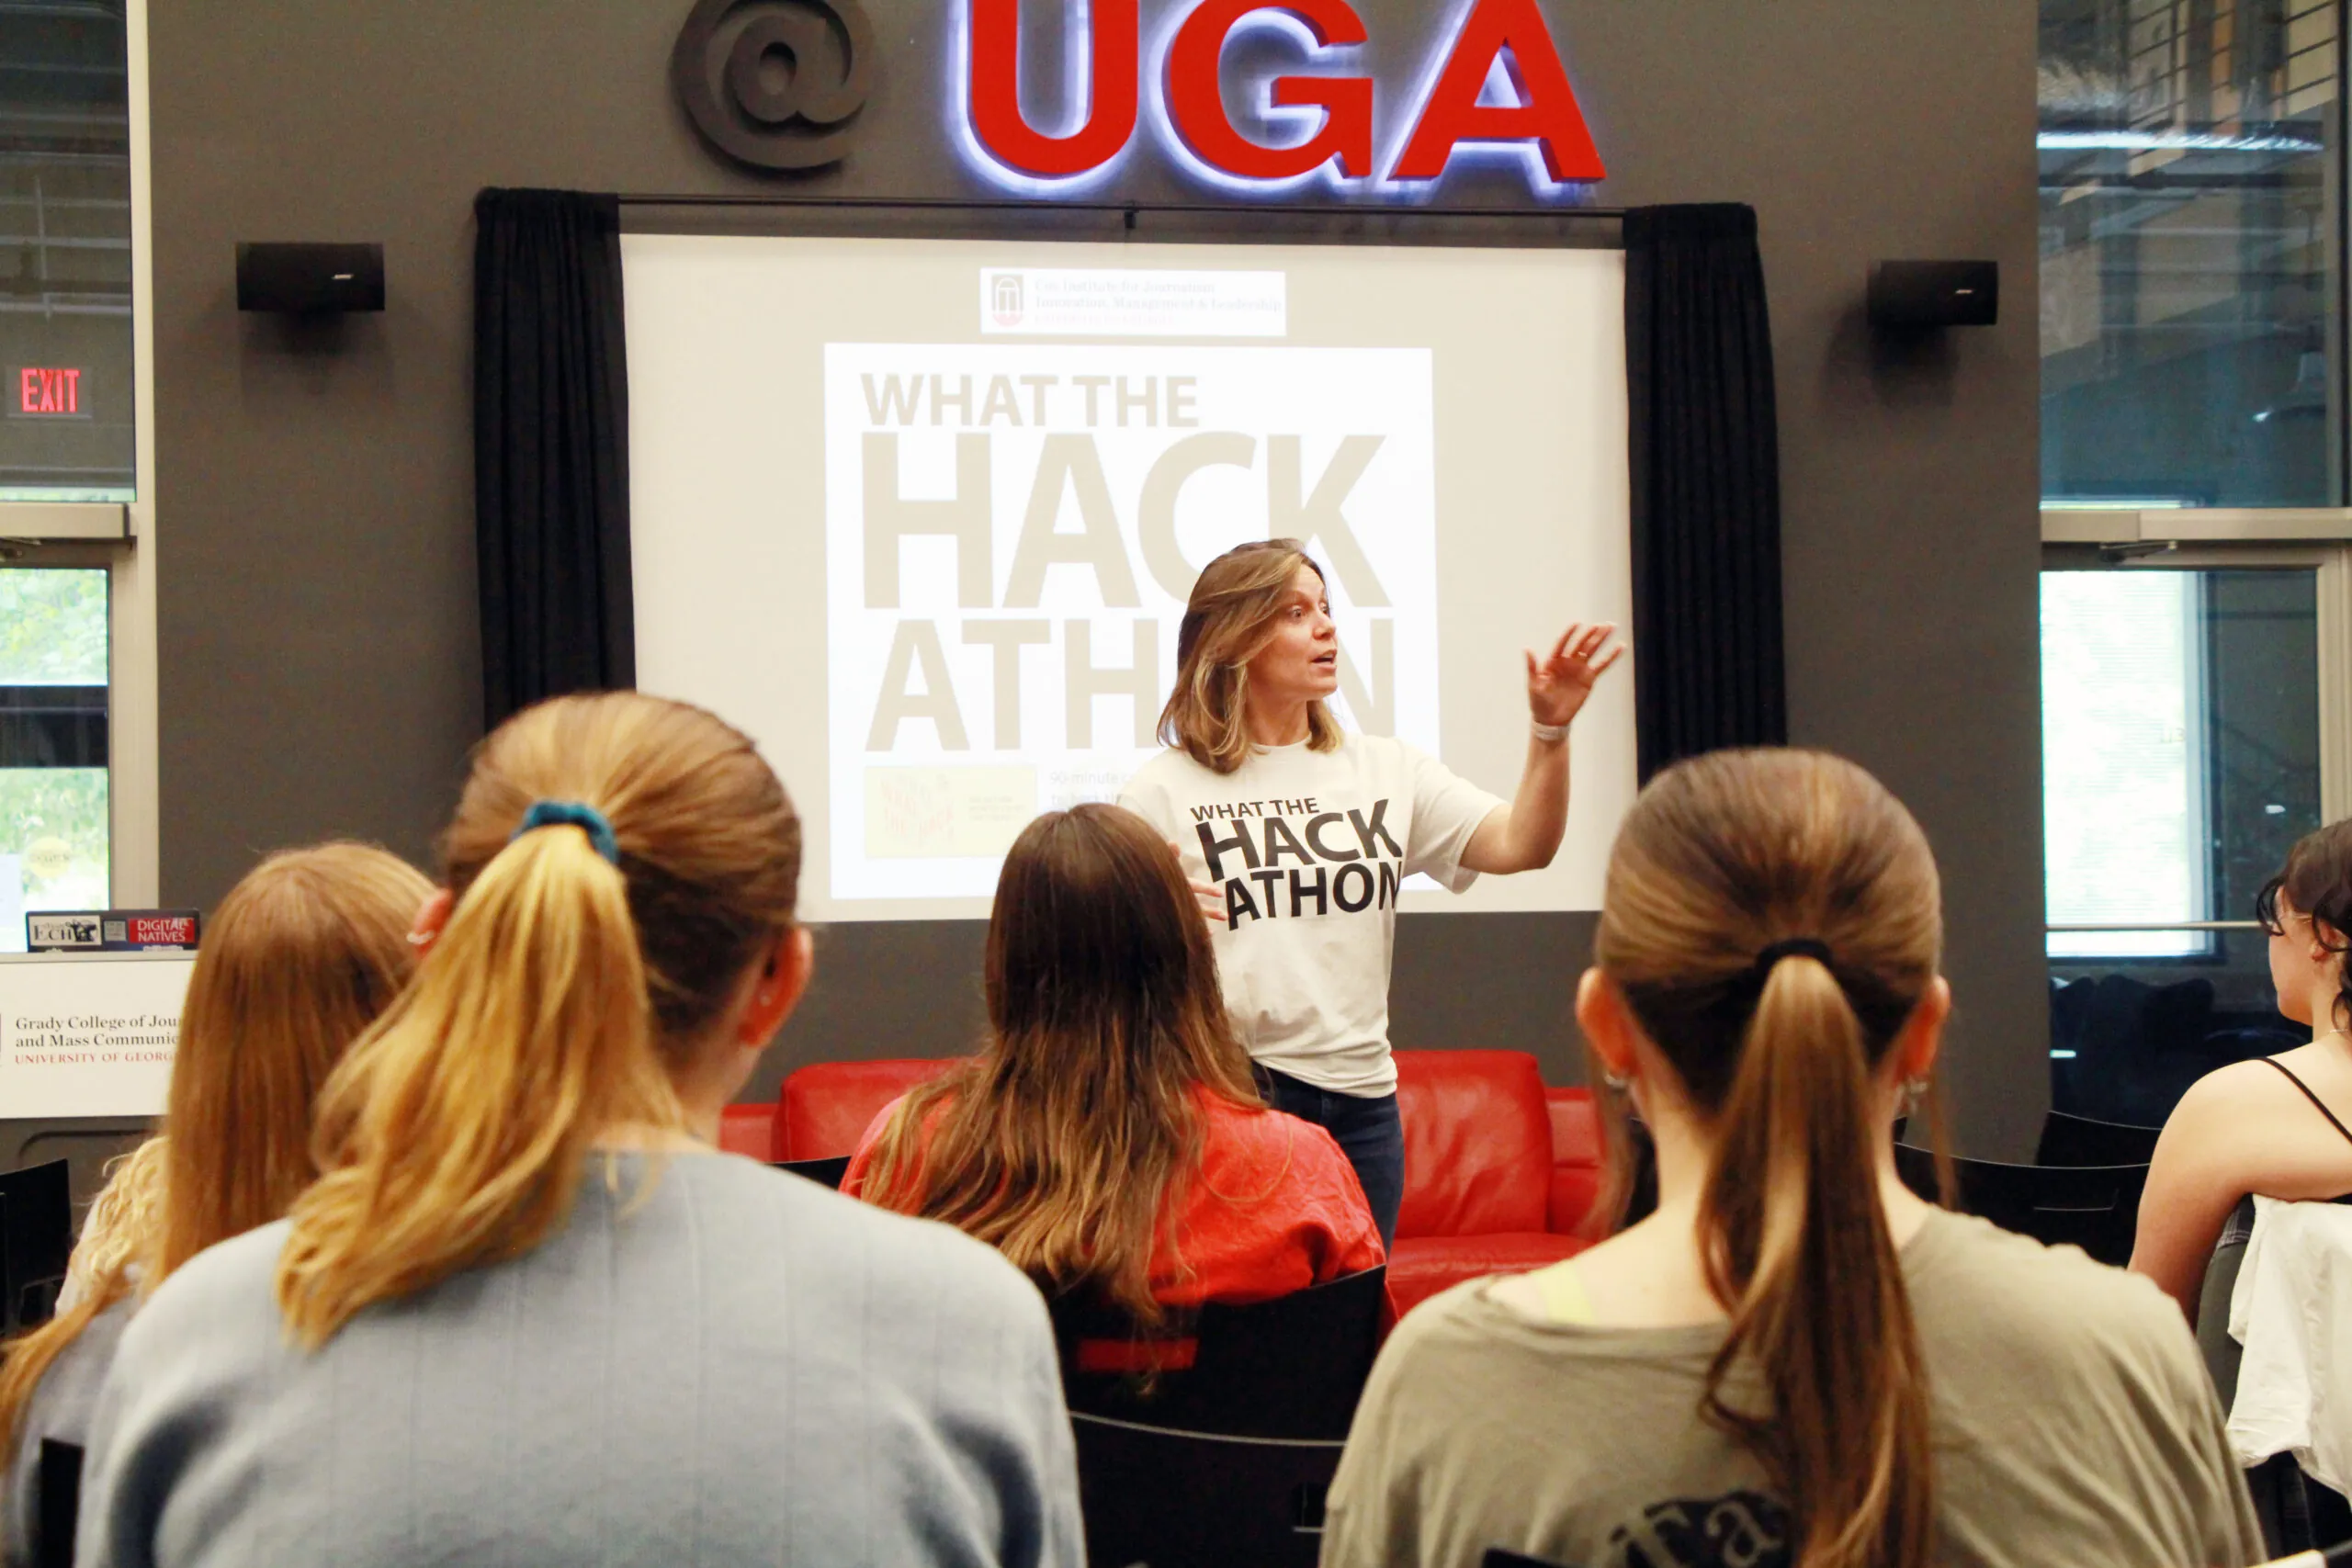 Amanda Bright stands in front of a screen that reads "What the Hackathon" to address students.